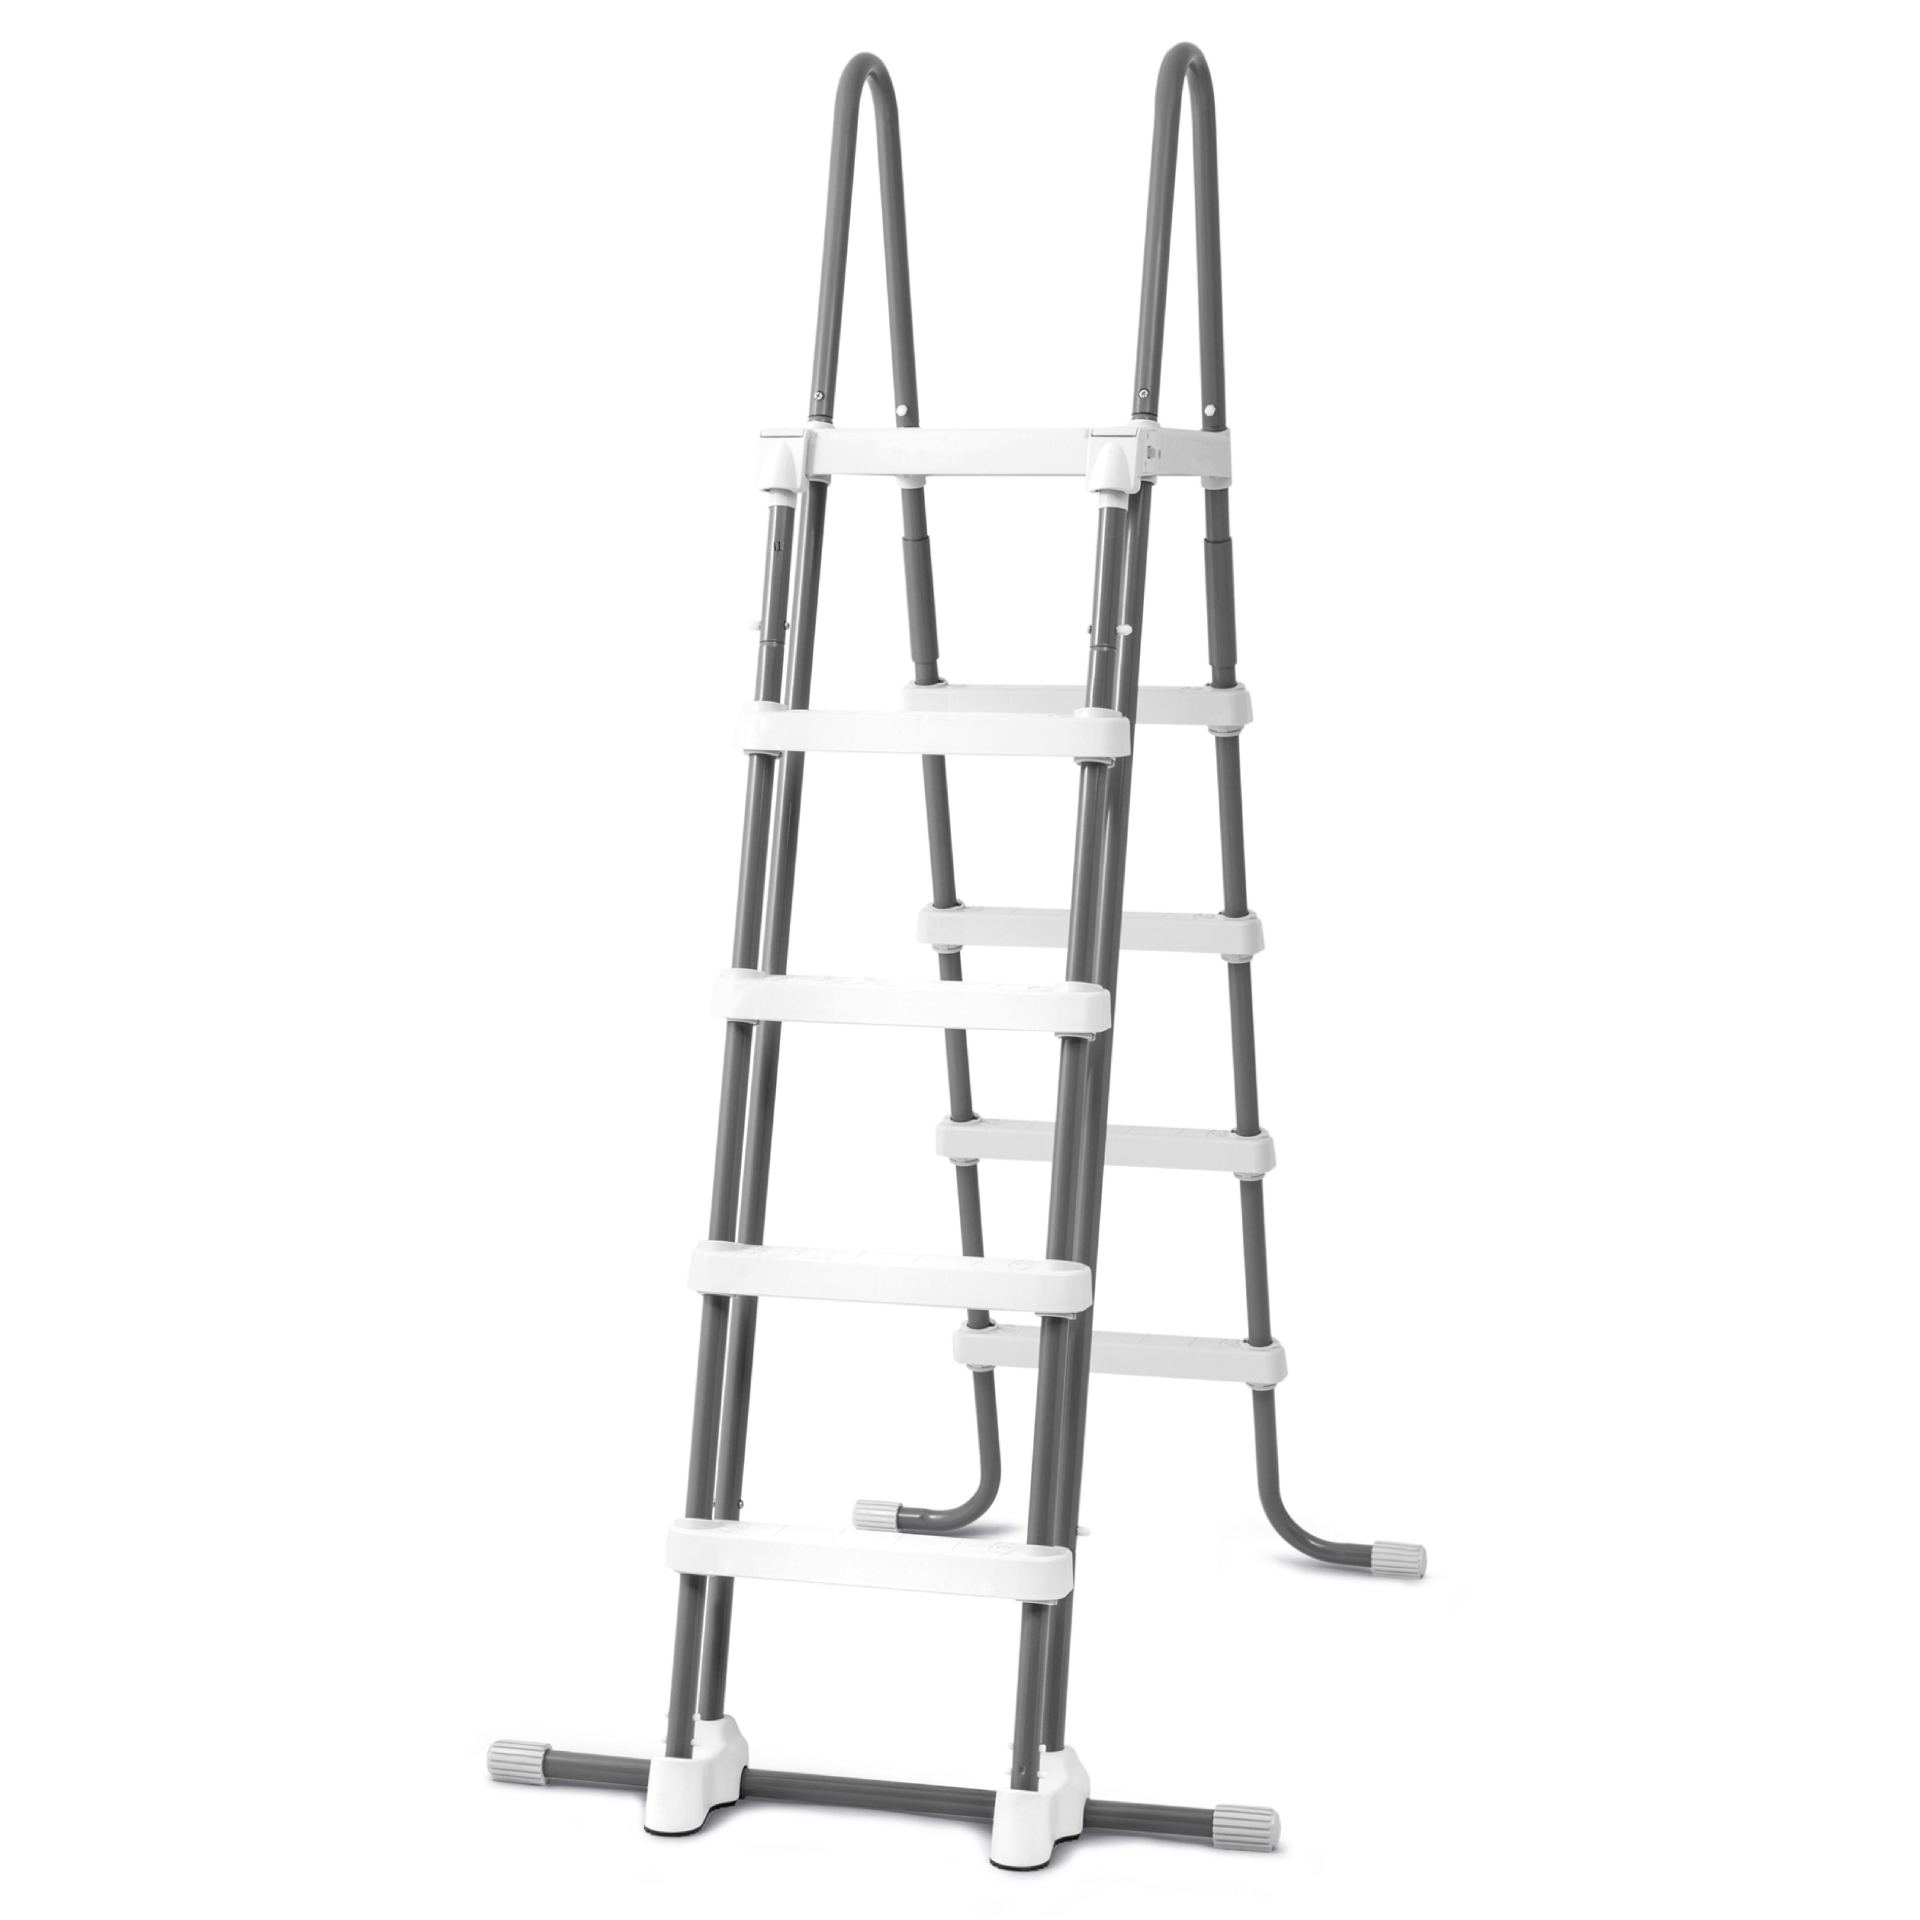 Intex Pool ladder with removable steps 132cm